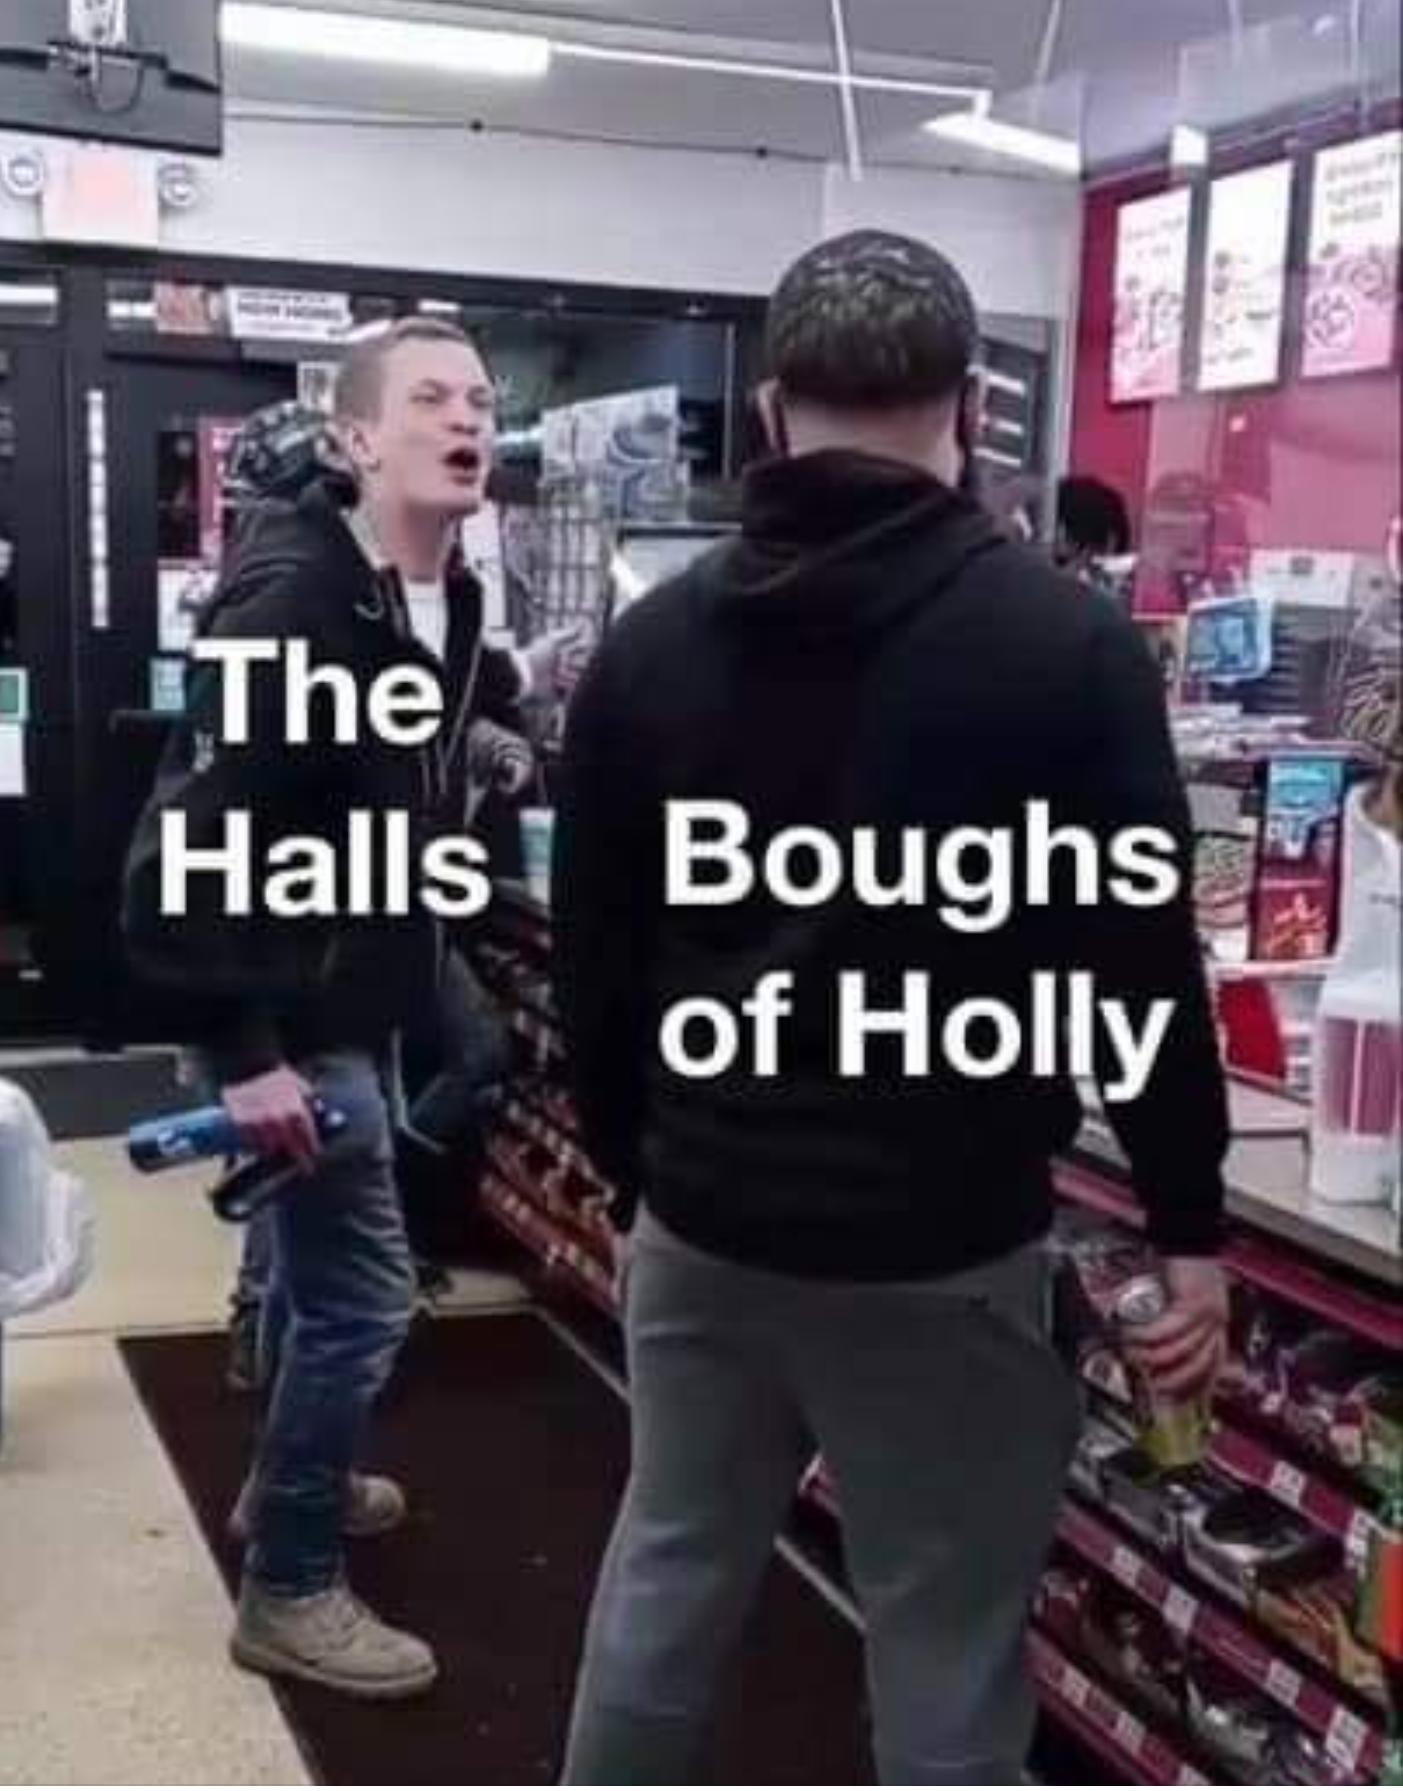 t shirt - " The Halls1 Boughs of Holly